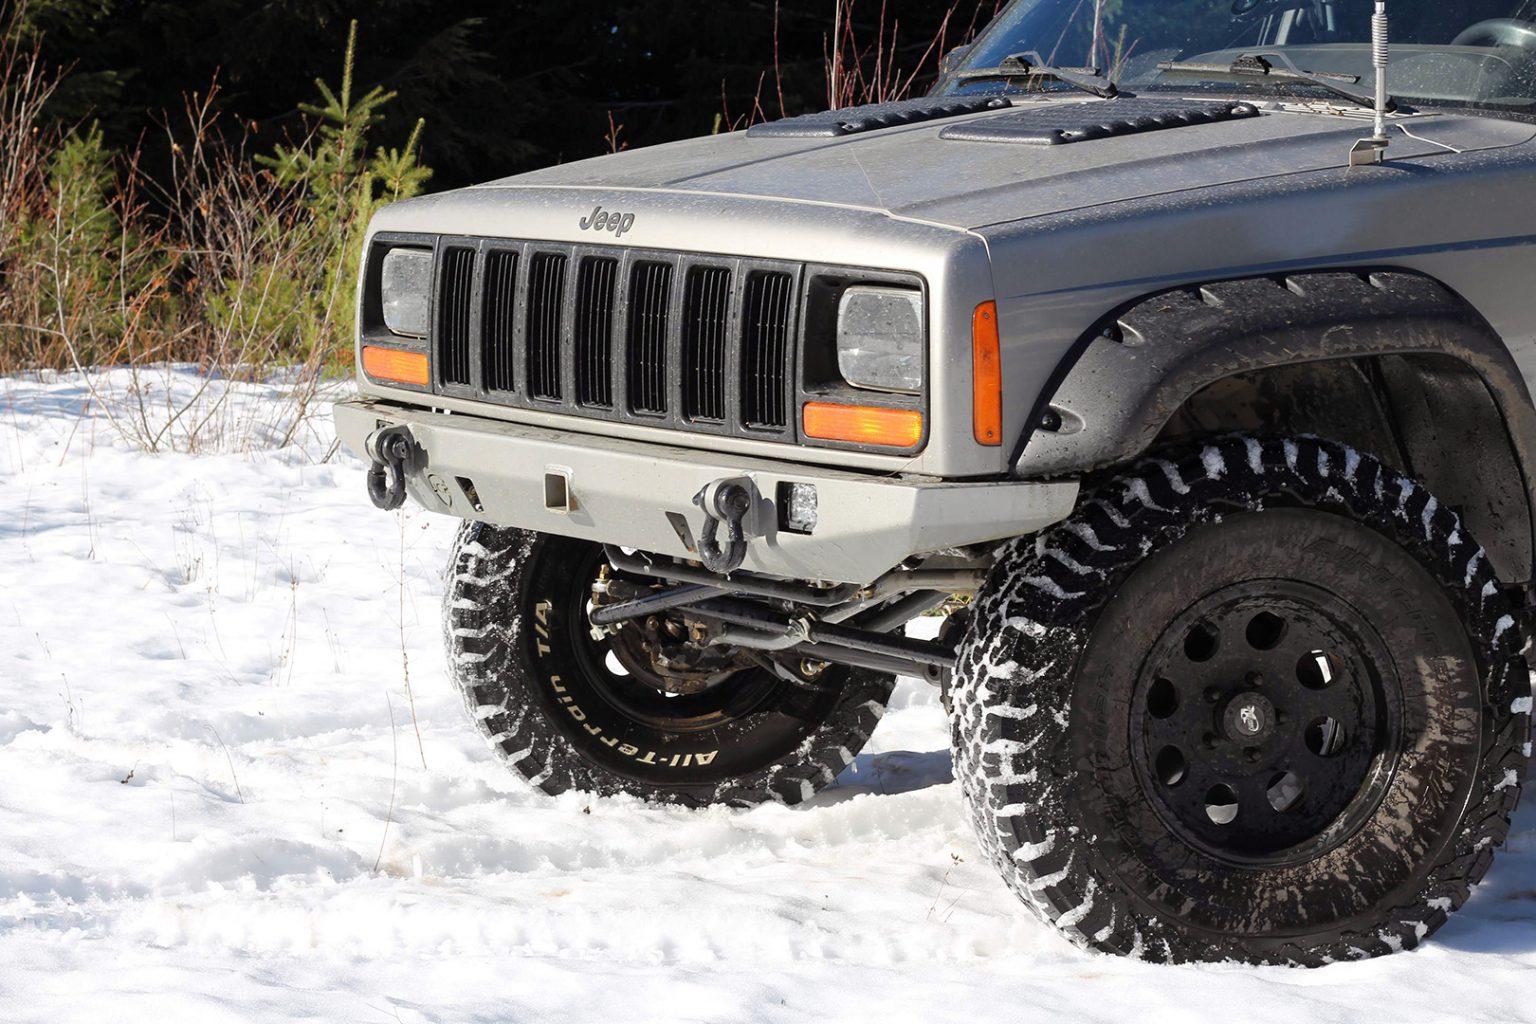 Jeep Cherokee Xj Build Project Clarence Wanderlusthiker